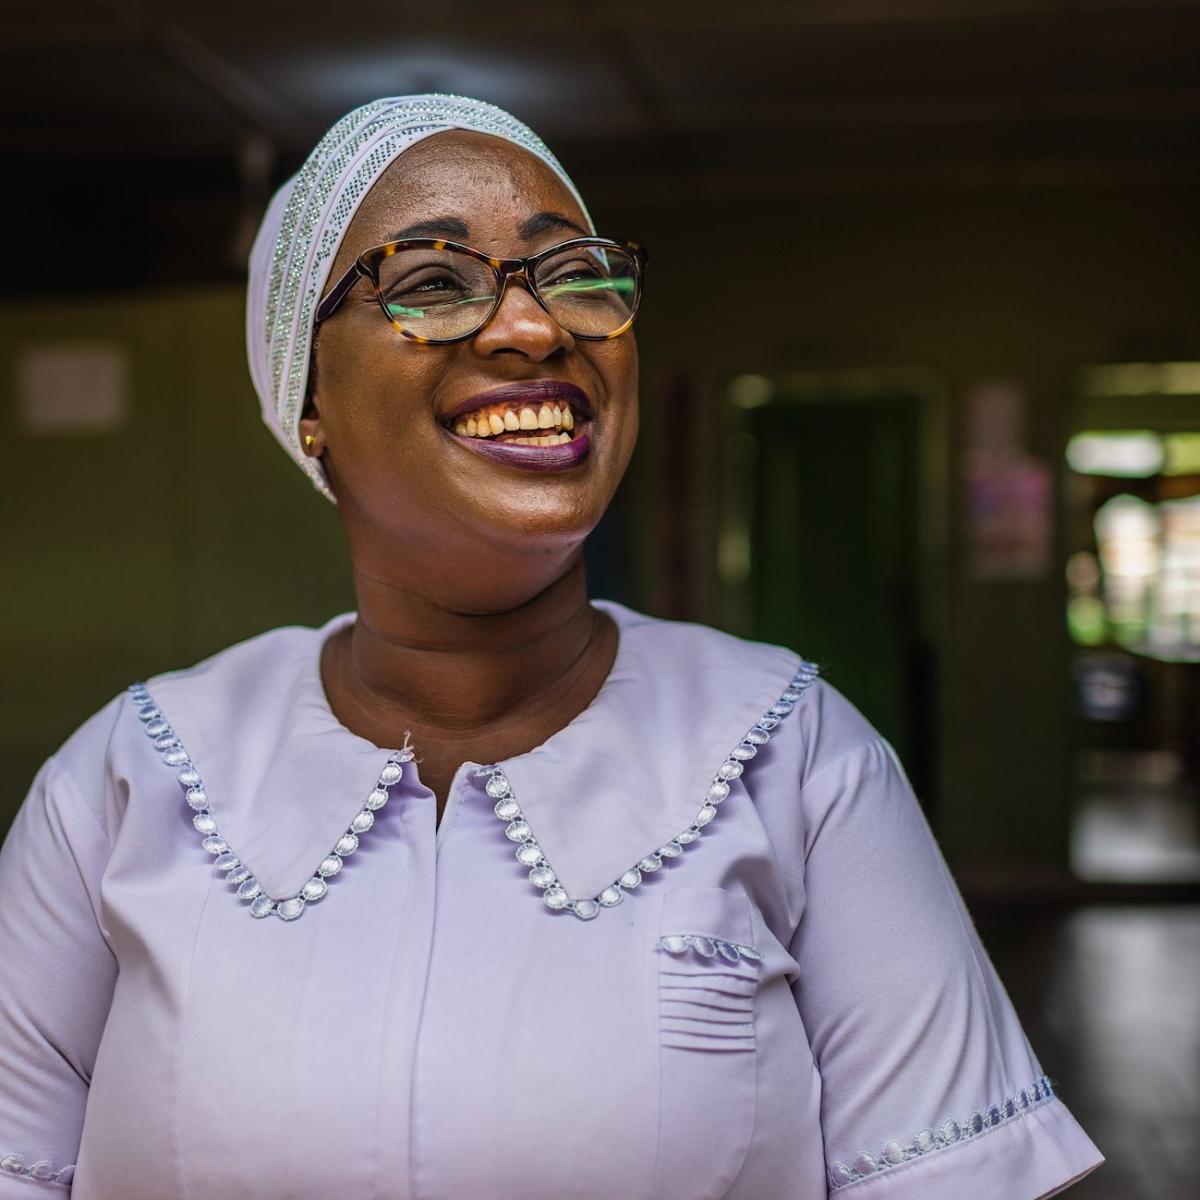 Adama Musah, pictured here, is the lead midwife at Tamale Reproductive and Child Health Center in northern Ghana.